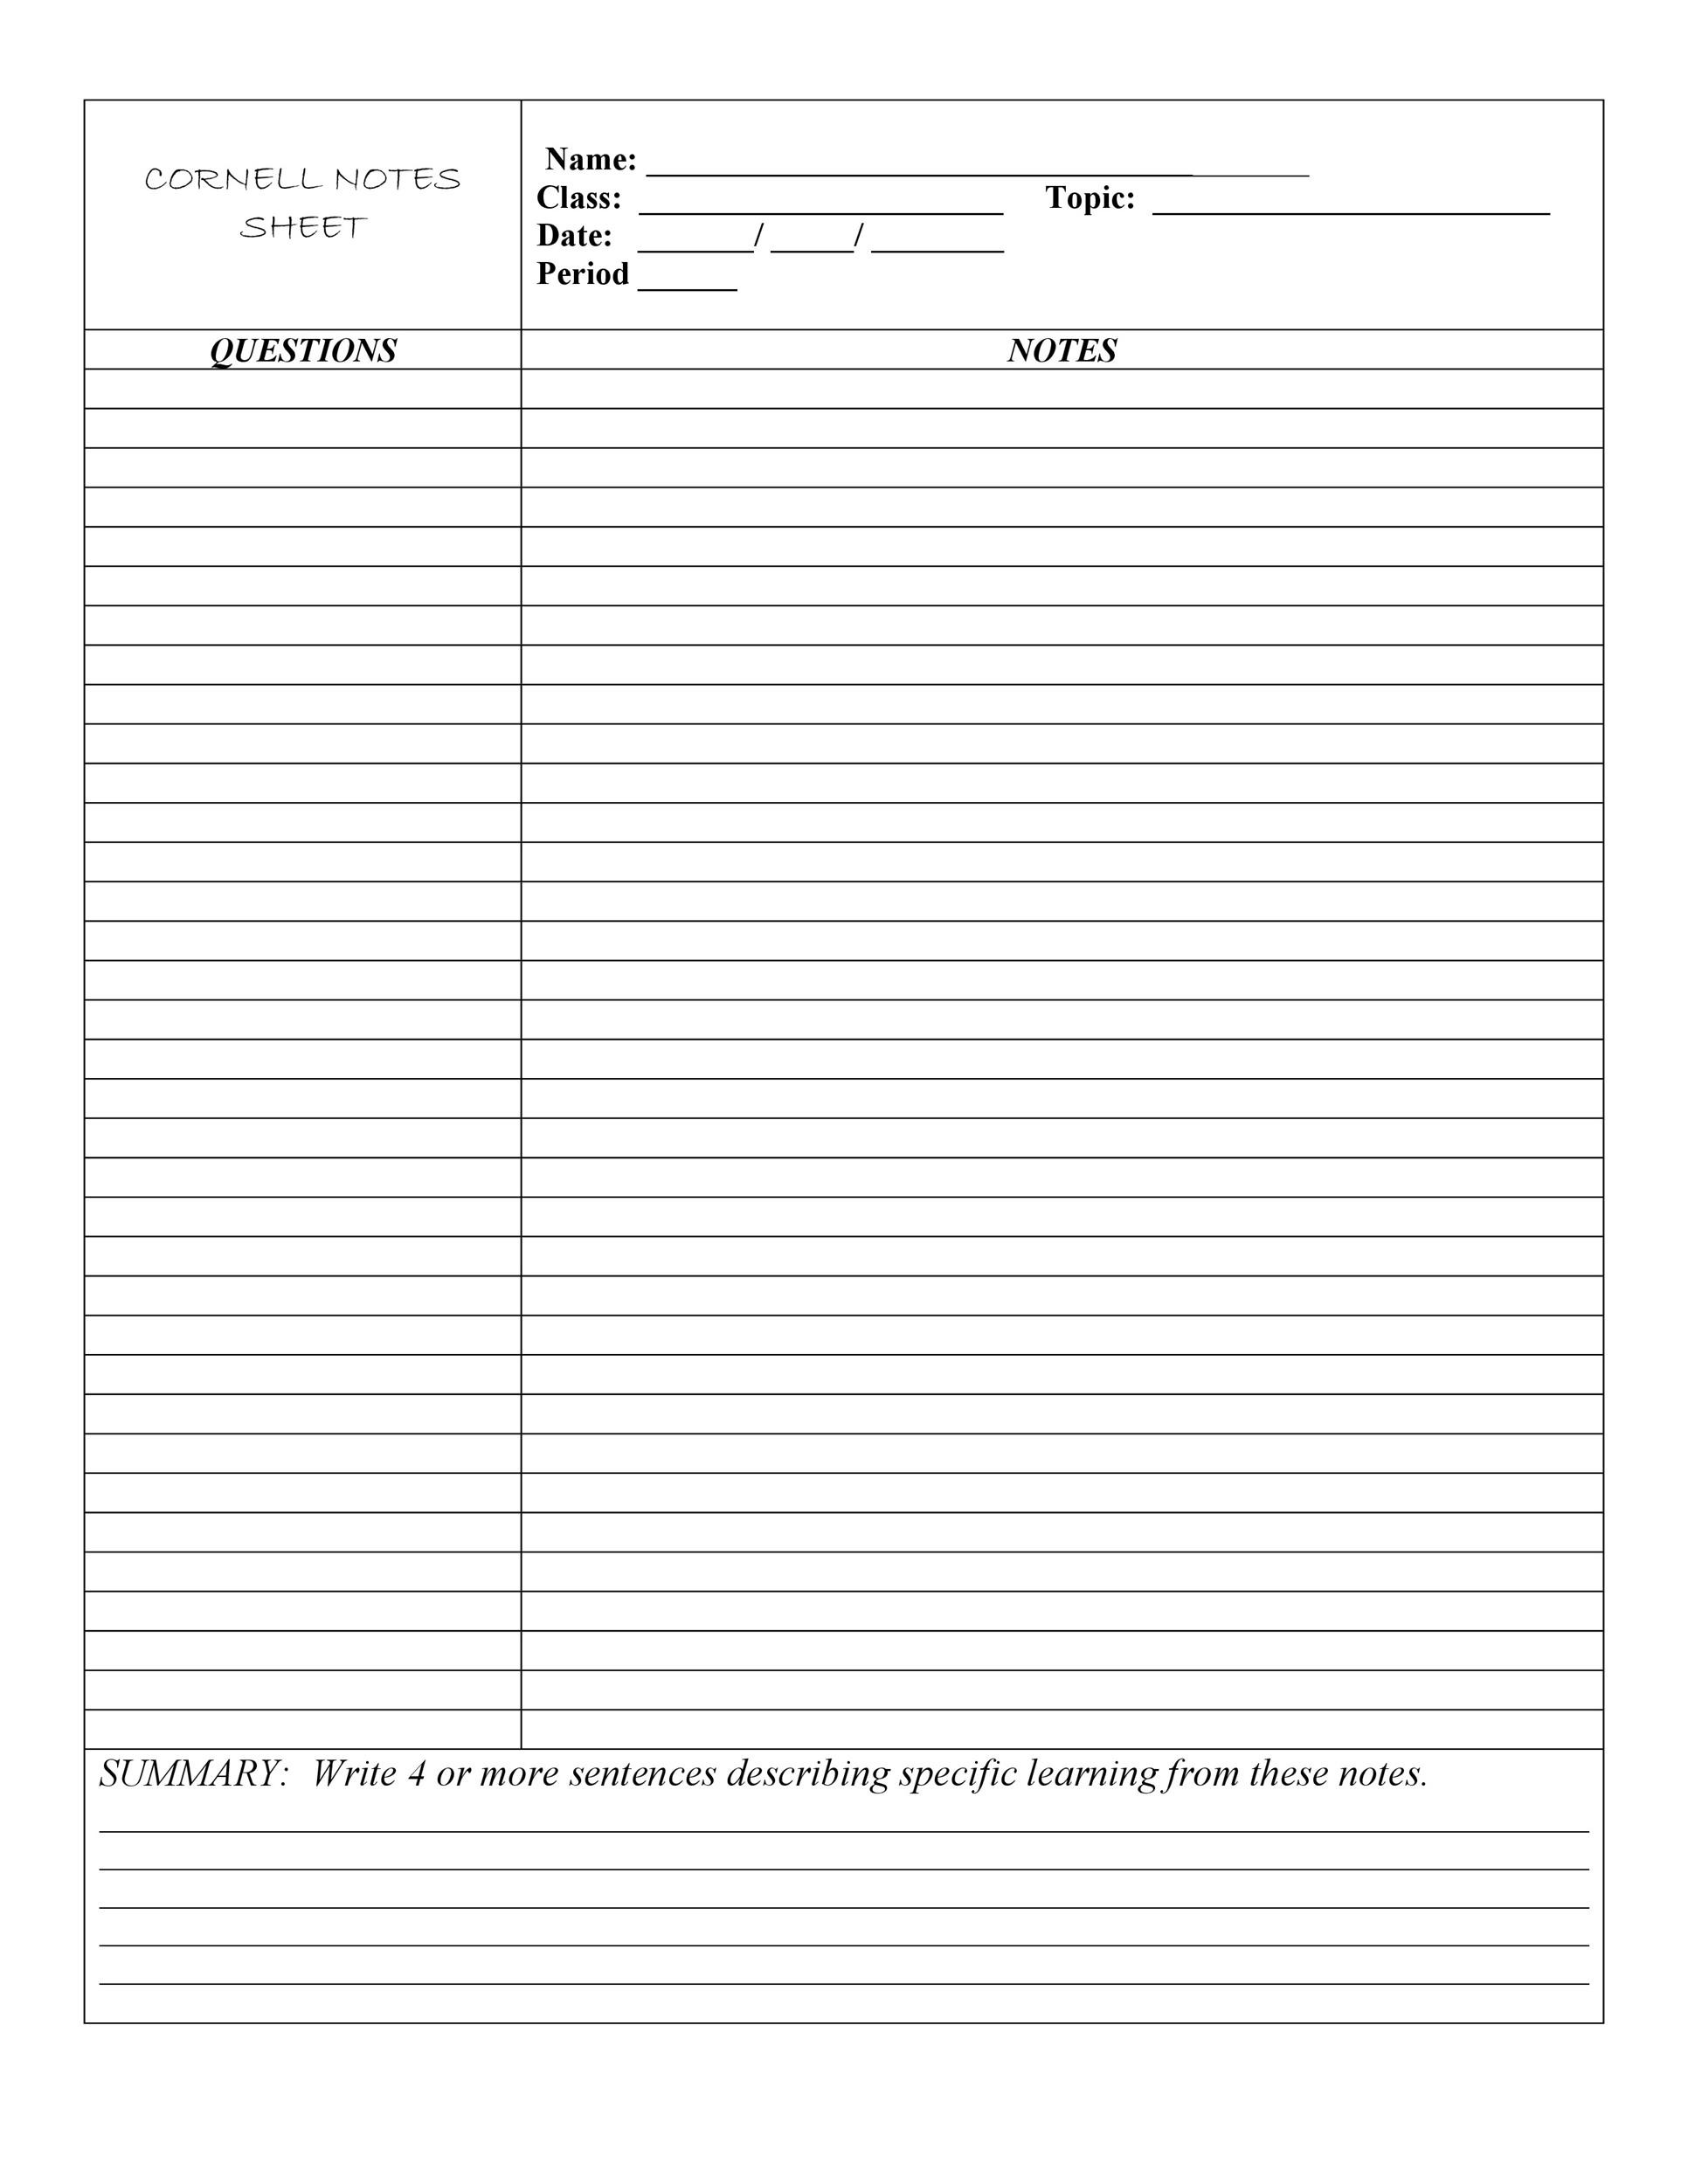 37 Cornell Notes Templates Examples Word Excel Pdf ᐅ